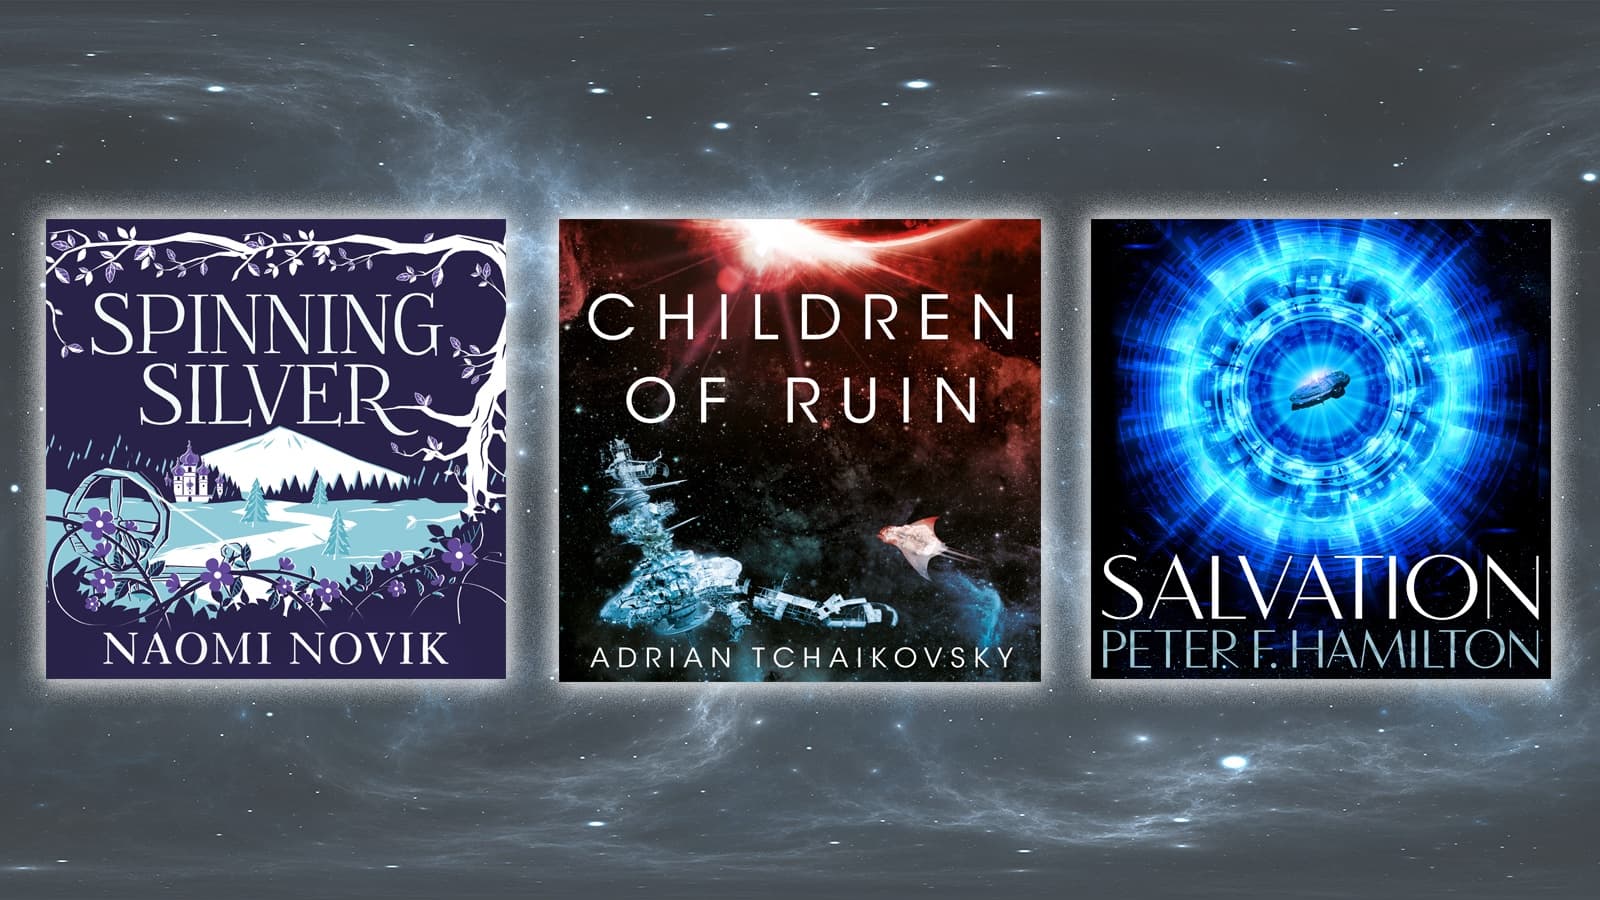 Book covers of Spinning Silver, Children of Ruin and Salvation on a swirling black background